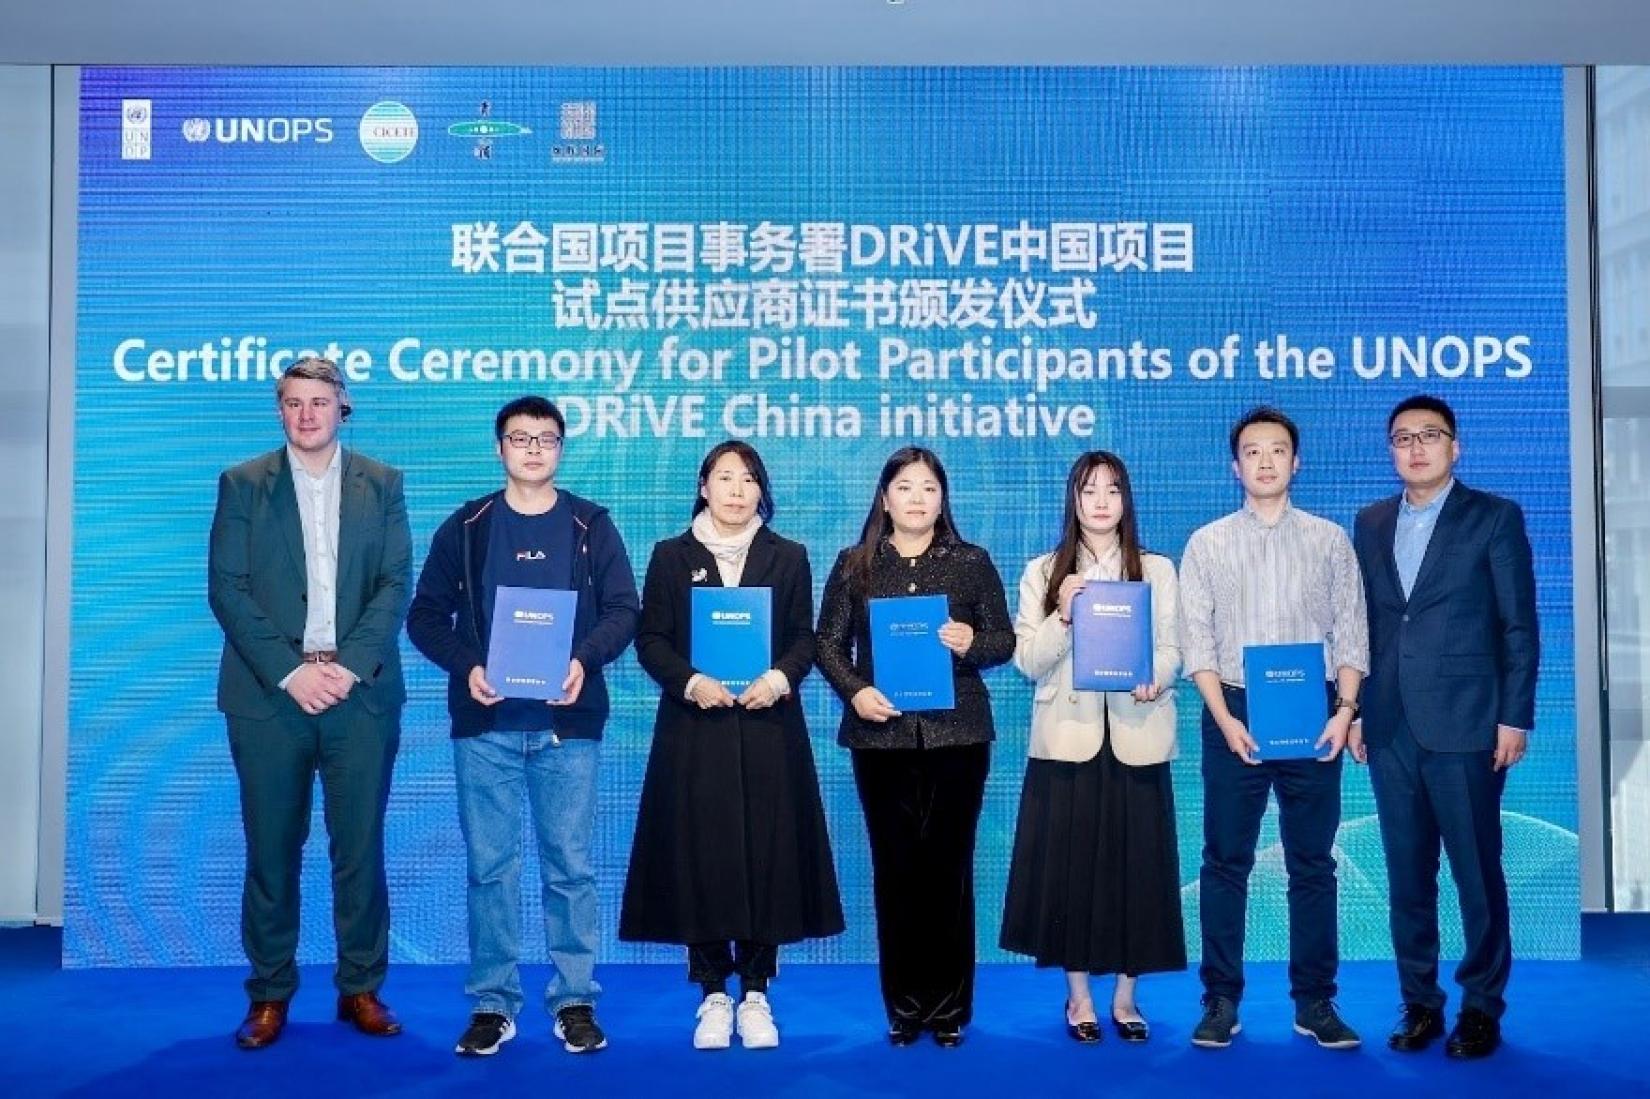 Certificate Ceremony for Pilot Participants of the UNOPS DriVE China Initiative